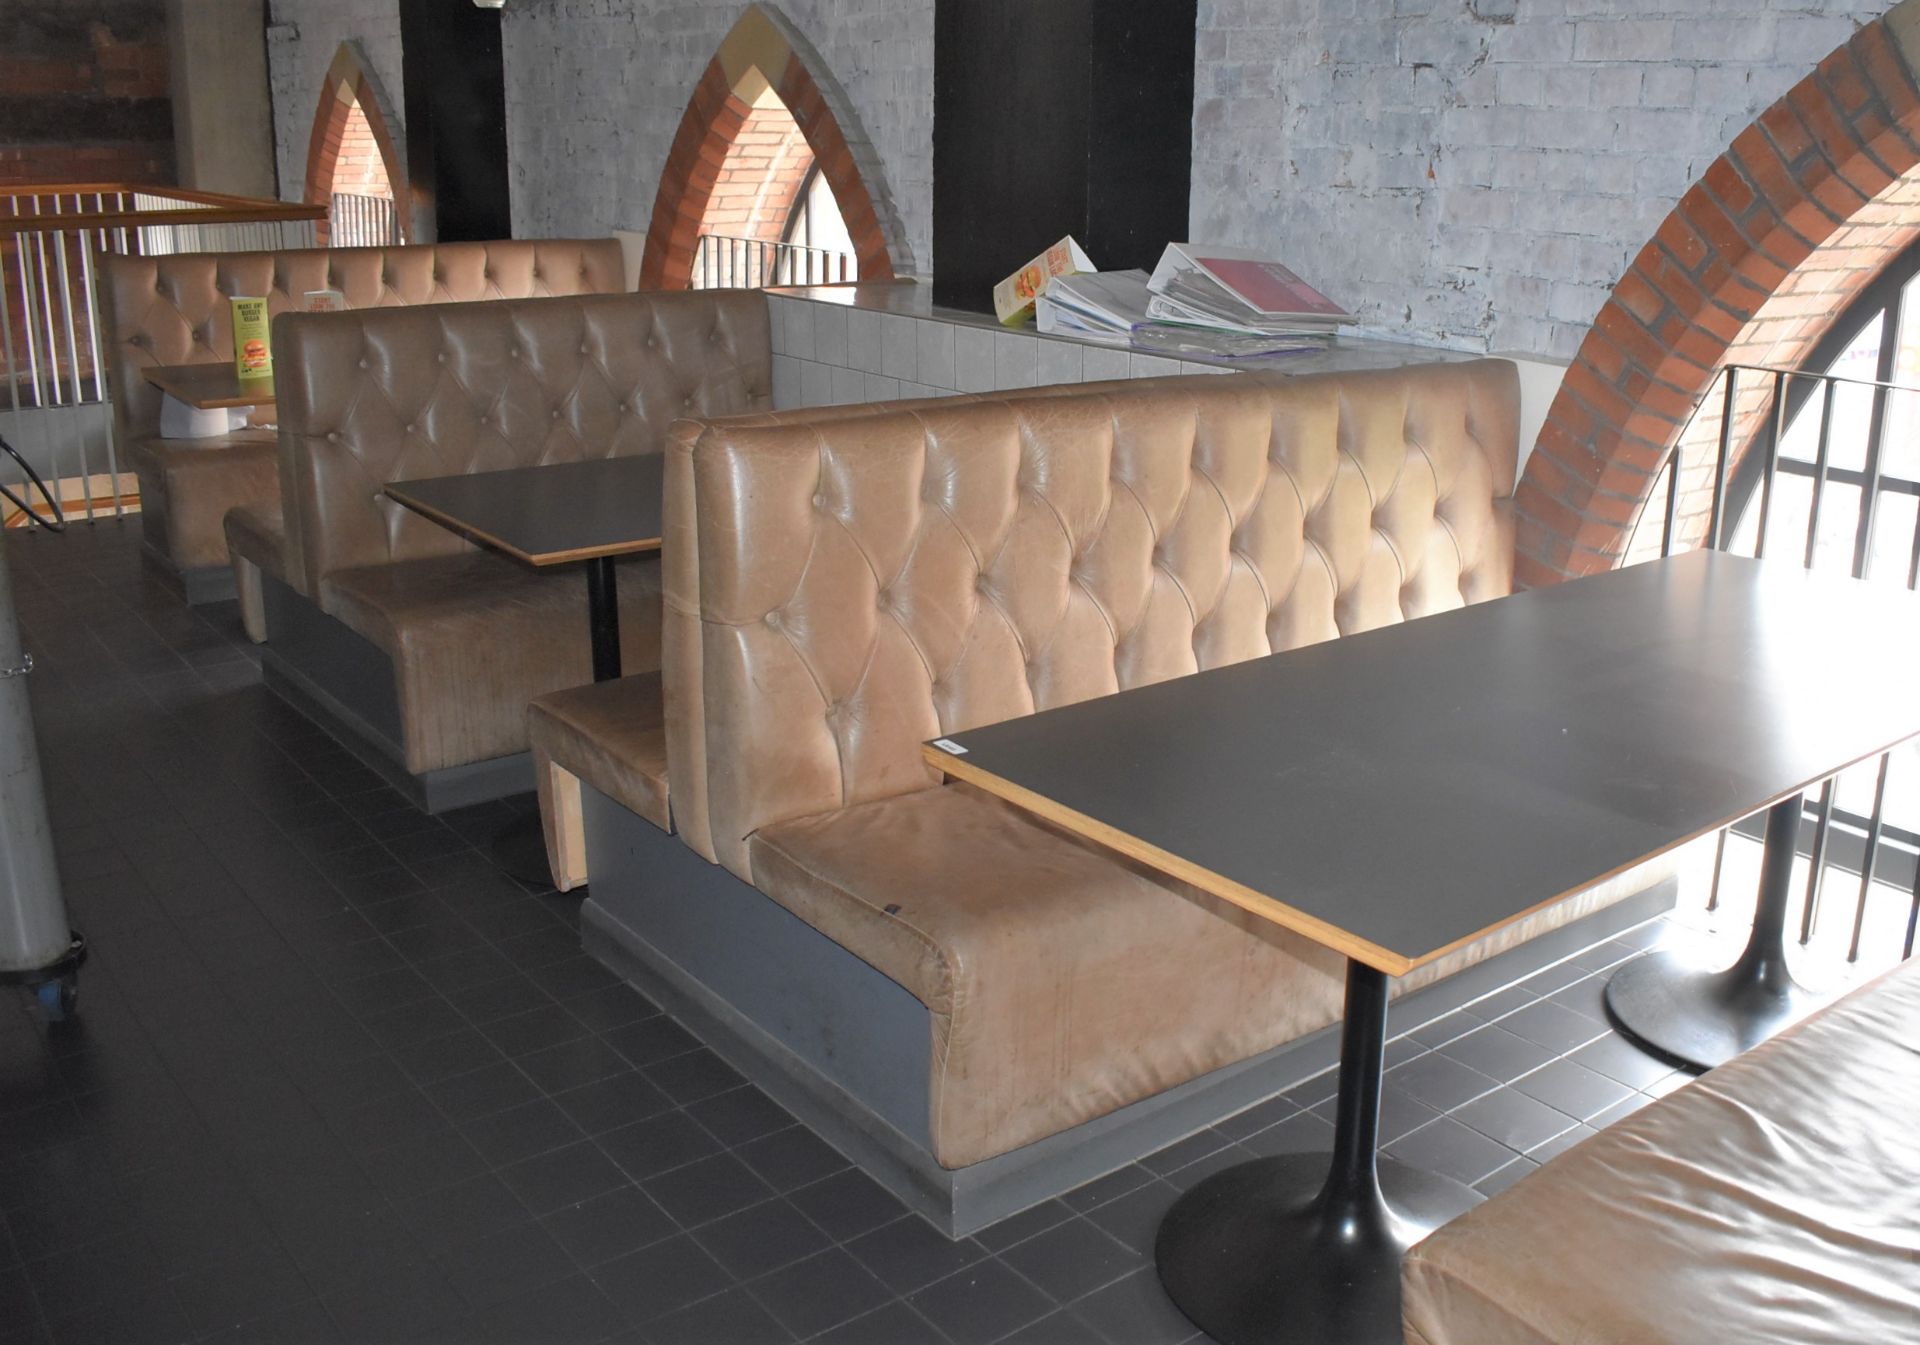 1 x Collection of Restaurant Seating Benches With Brown Leather Upholstery and Studded Backs - Image 26 of 26